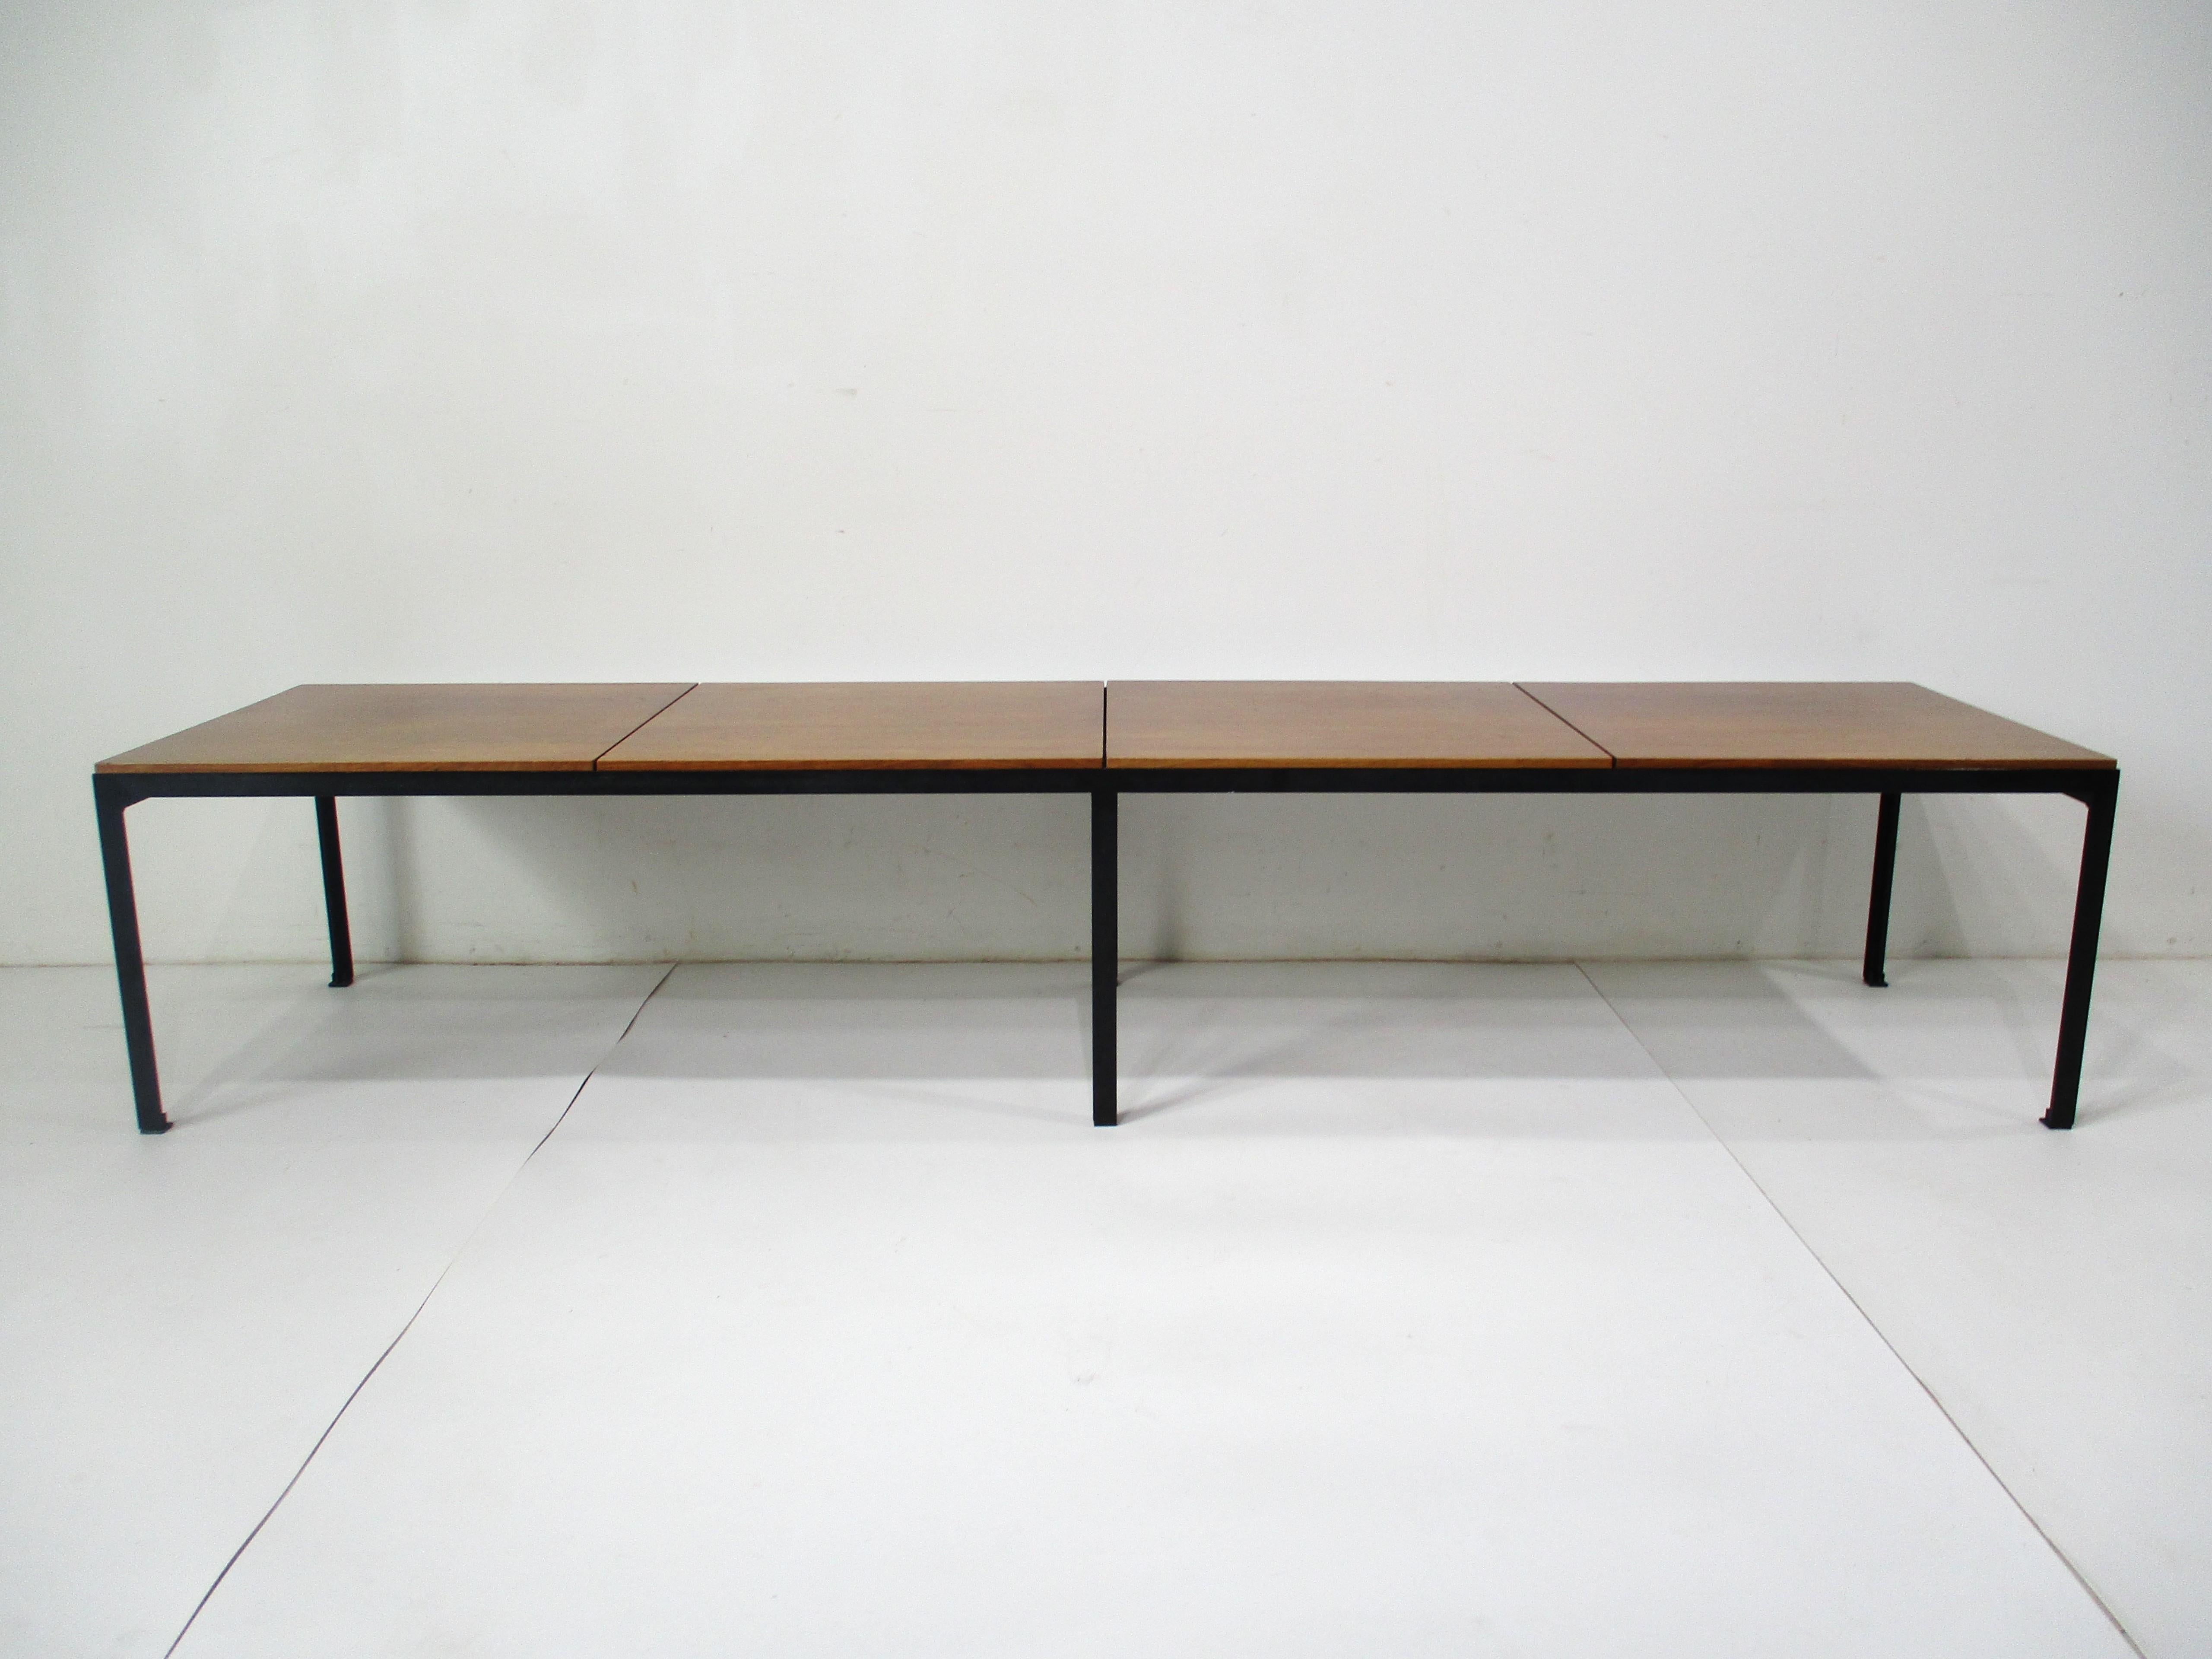 Early T Angle Walnut Coffee Table / Bench by Florence Knoll # 332 for Knoll (B)  For Sale 5